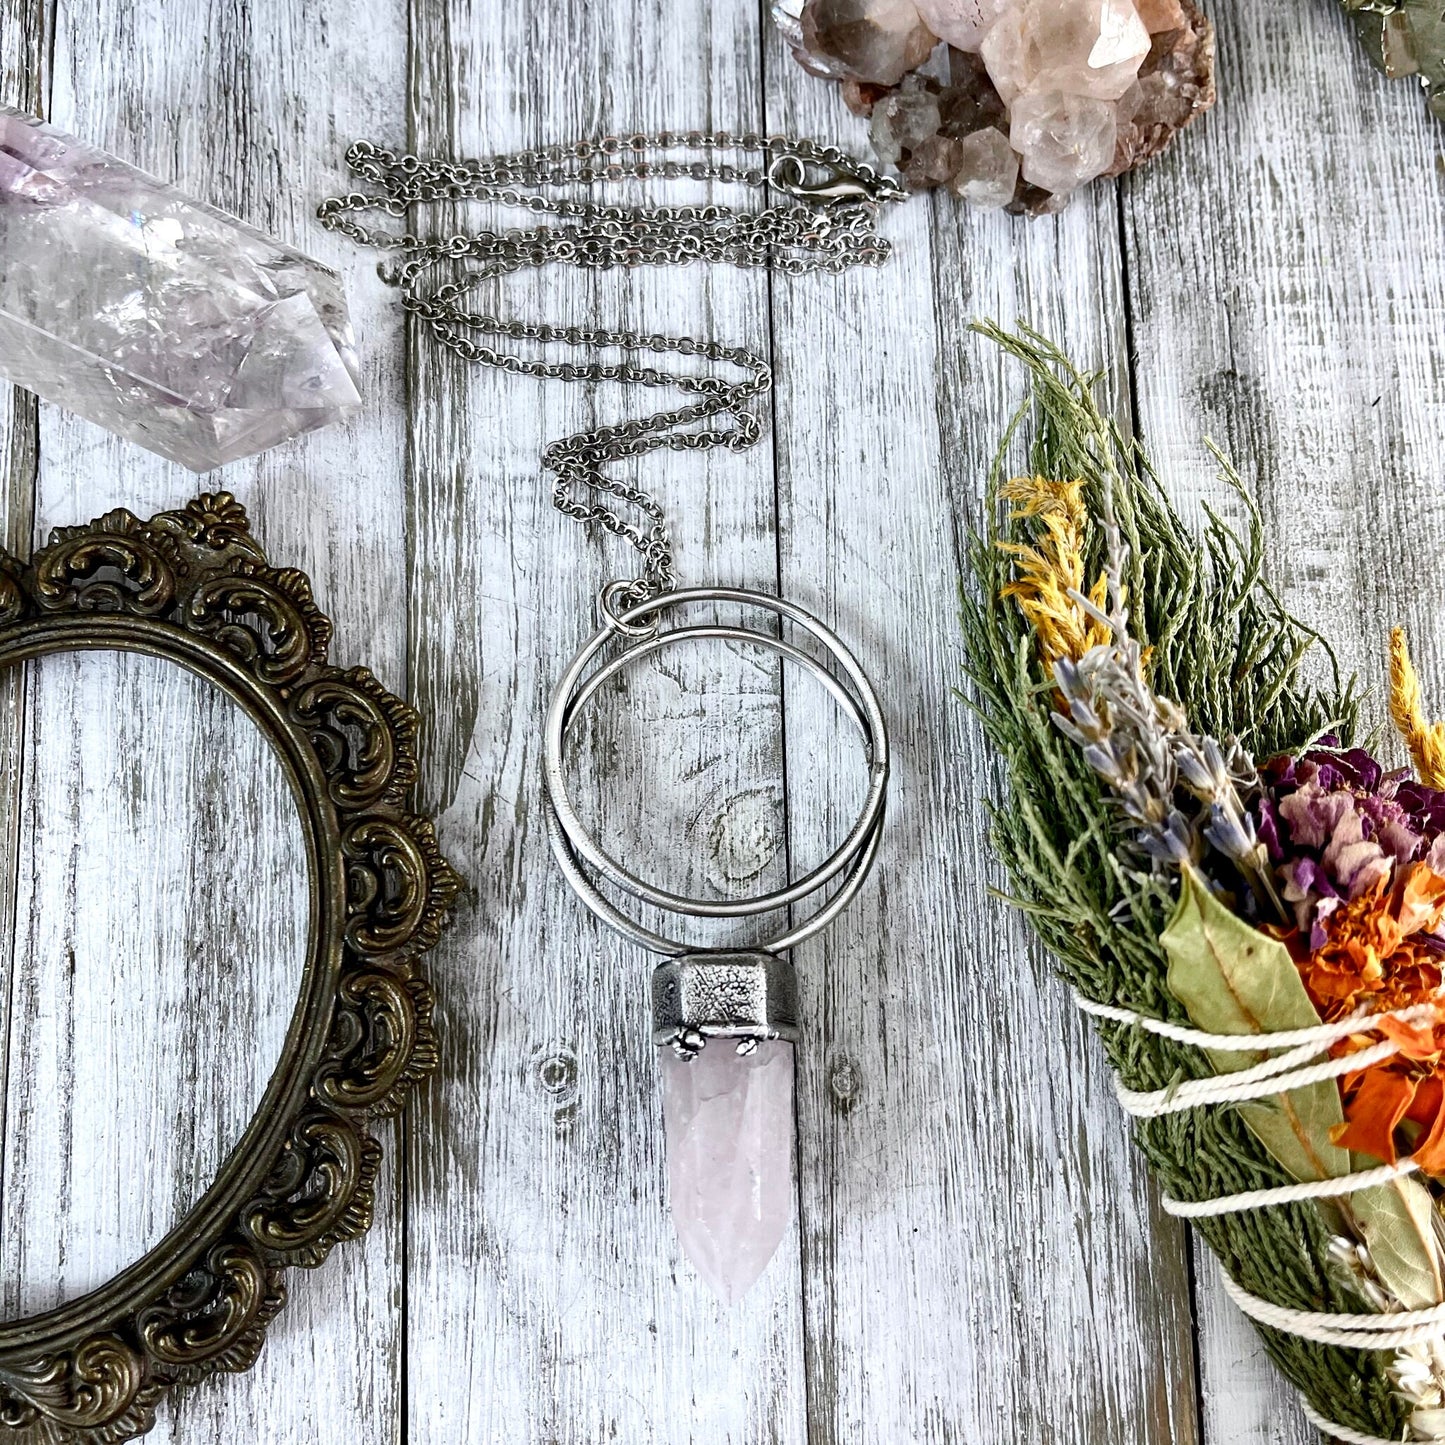 Silver Crystal Necklace Rose Quartz Necklace / Pink Quartz Necklace Natural Stone Necklace - Foxlark Crystal Jewelry